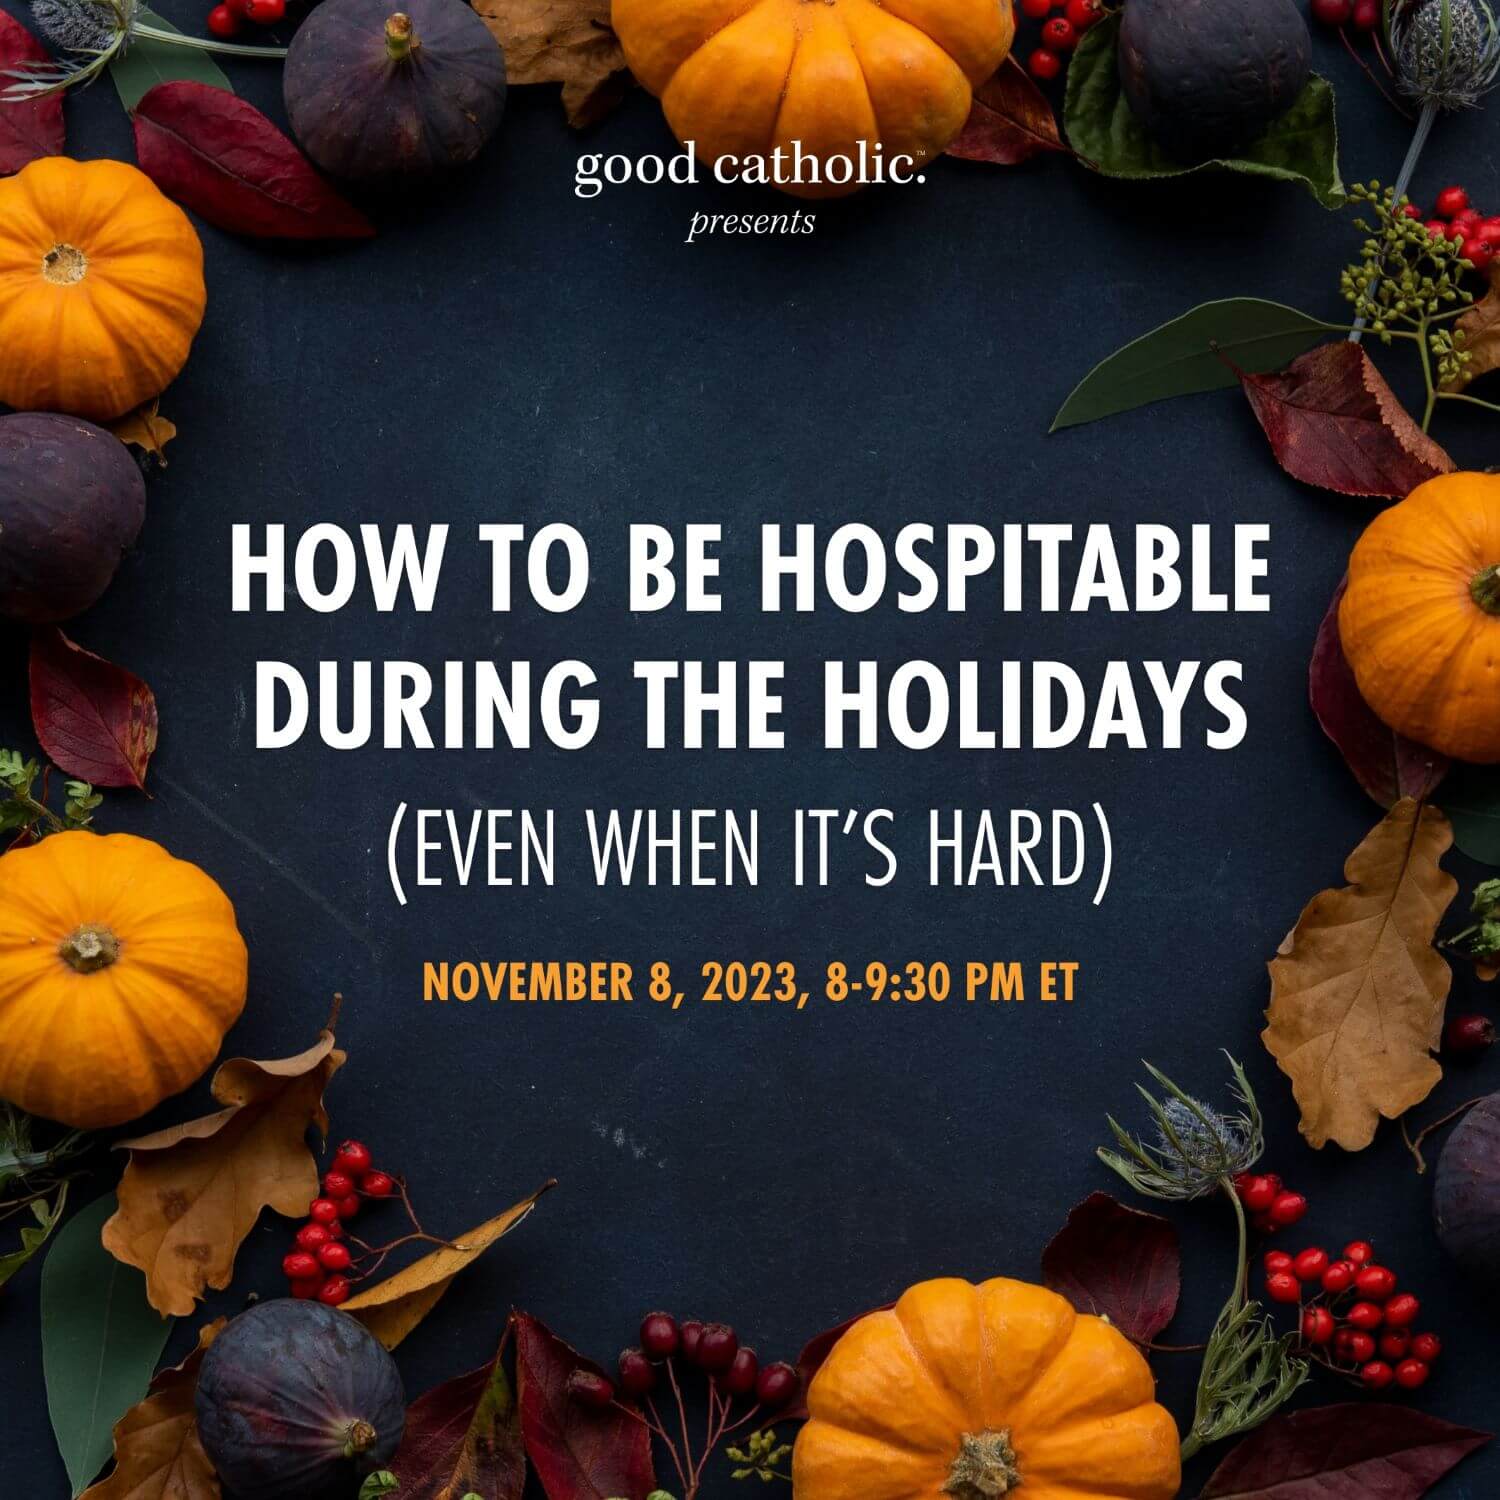 How to Be Hospitable During the Holidays (Even When It’s Hard)